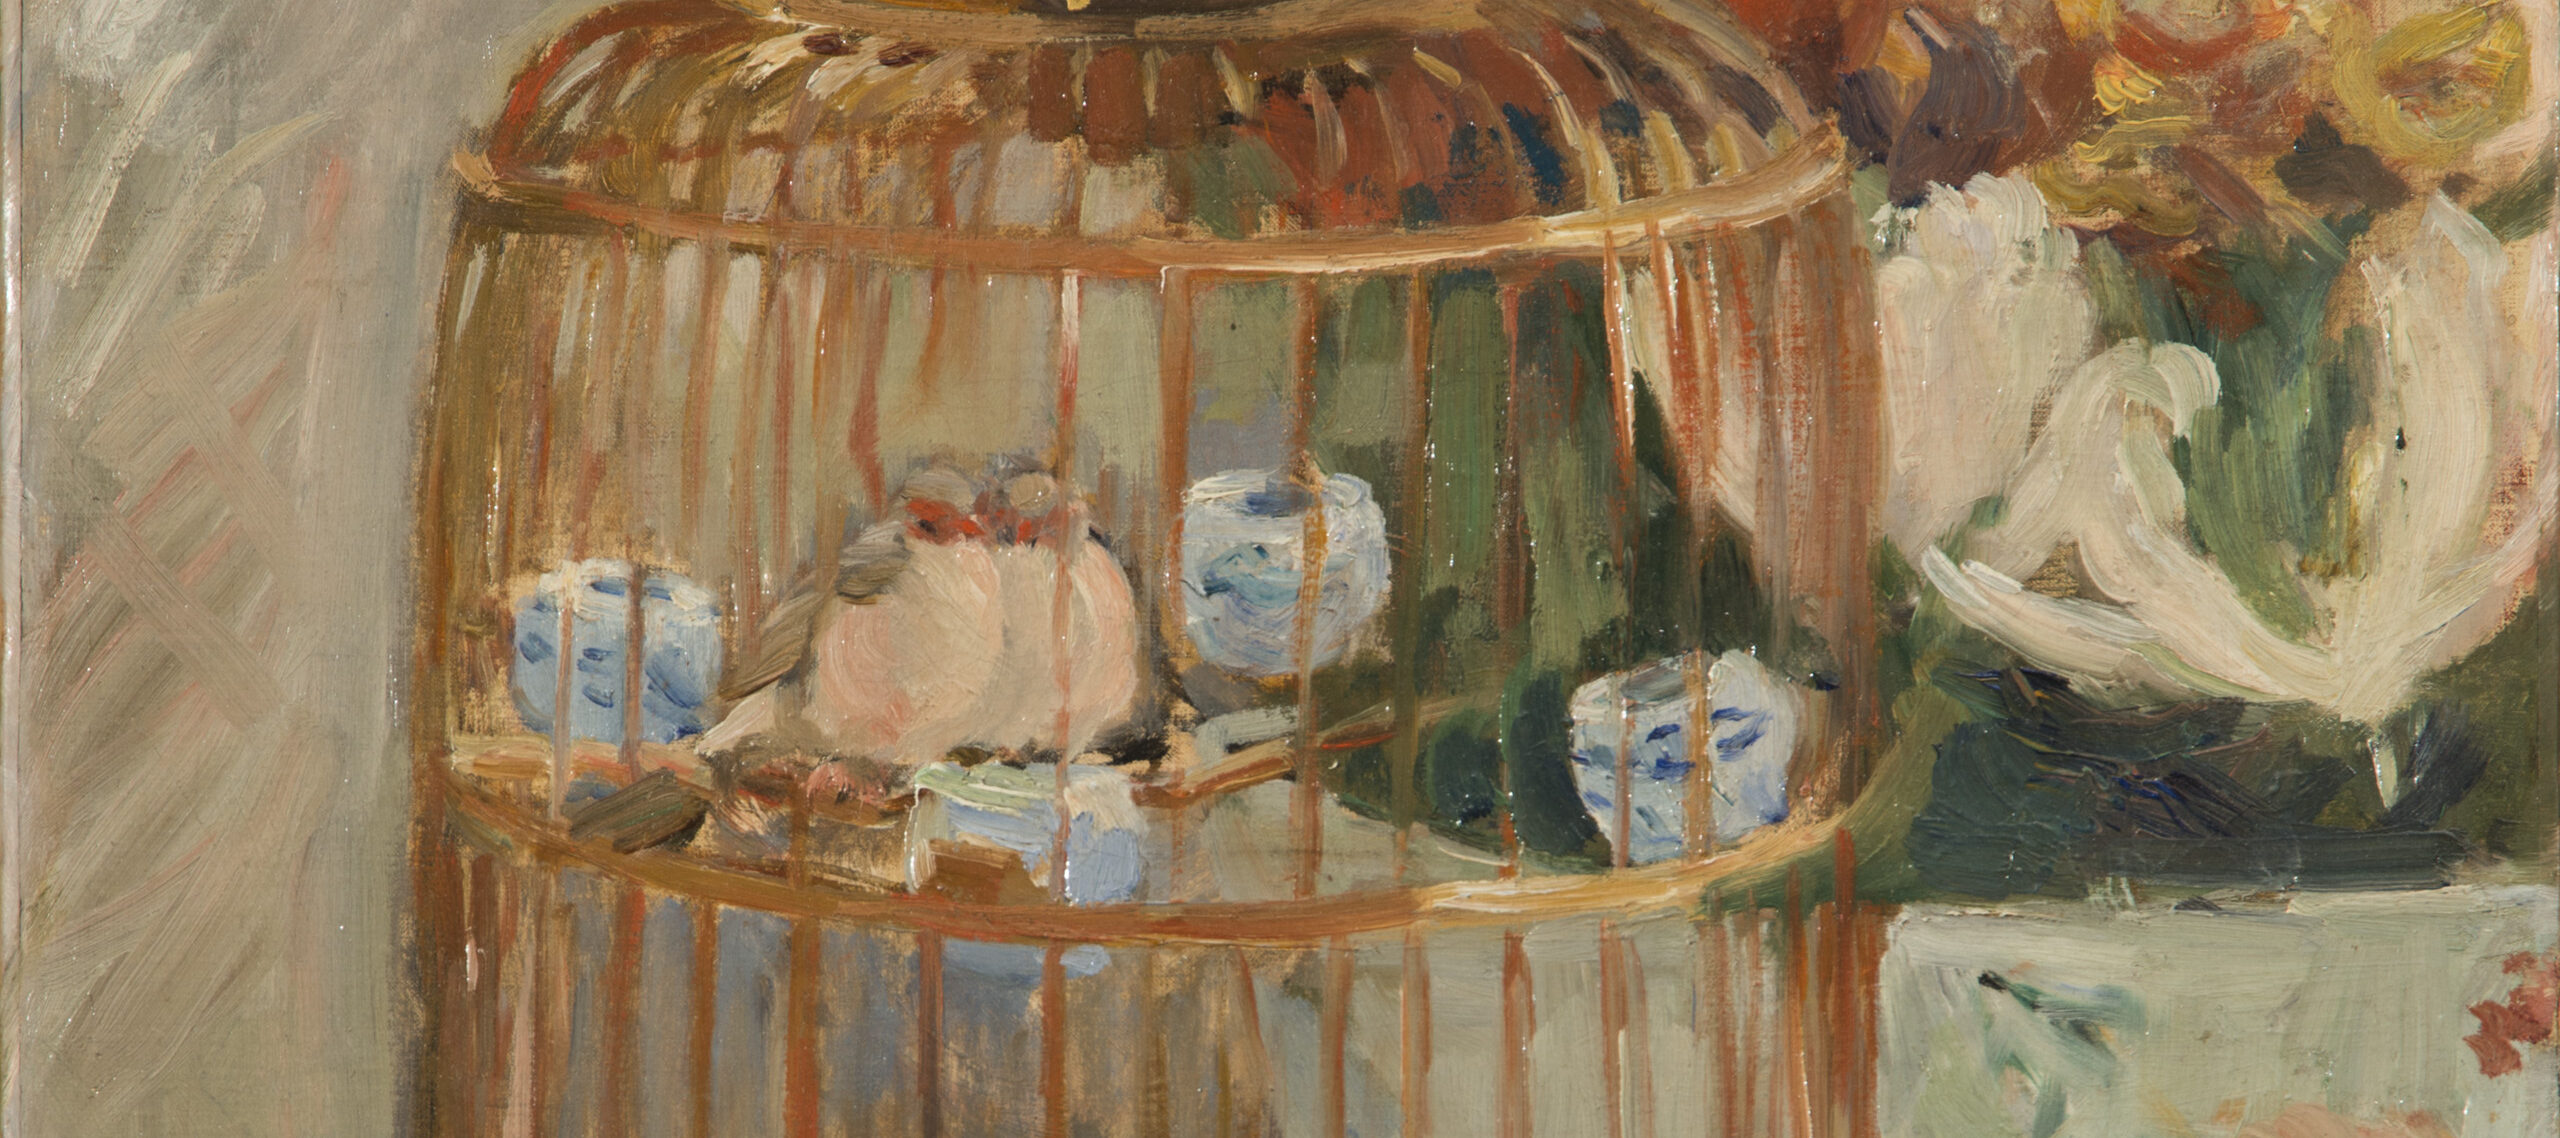 Rendered in loose, impressionistic brushstrokes in muted pastel tones, the still life painting depicts a brass birdcage with two small birds cuddled next to each other on a perch. The cage sits adjacent to and partially obscures a bowl of lush red, yellow, and white flowers.